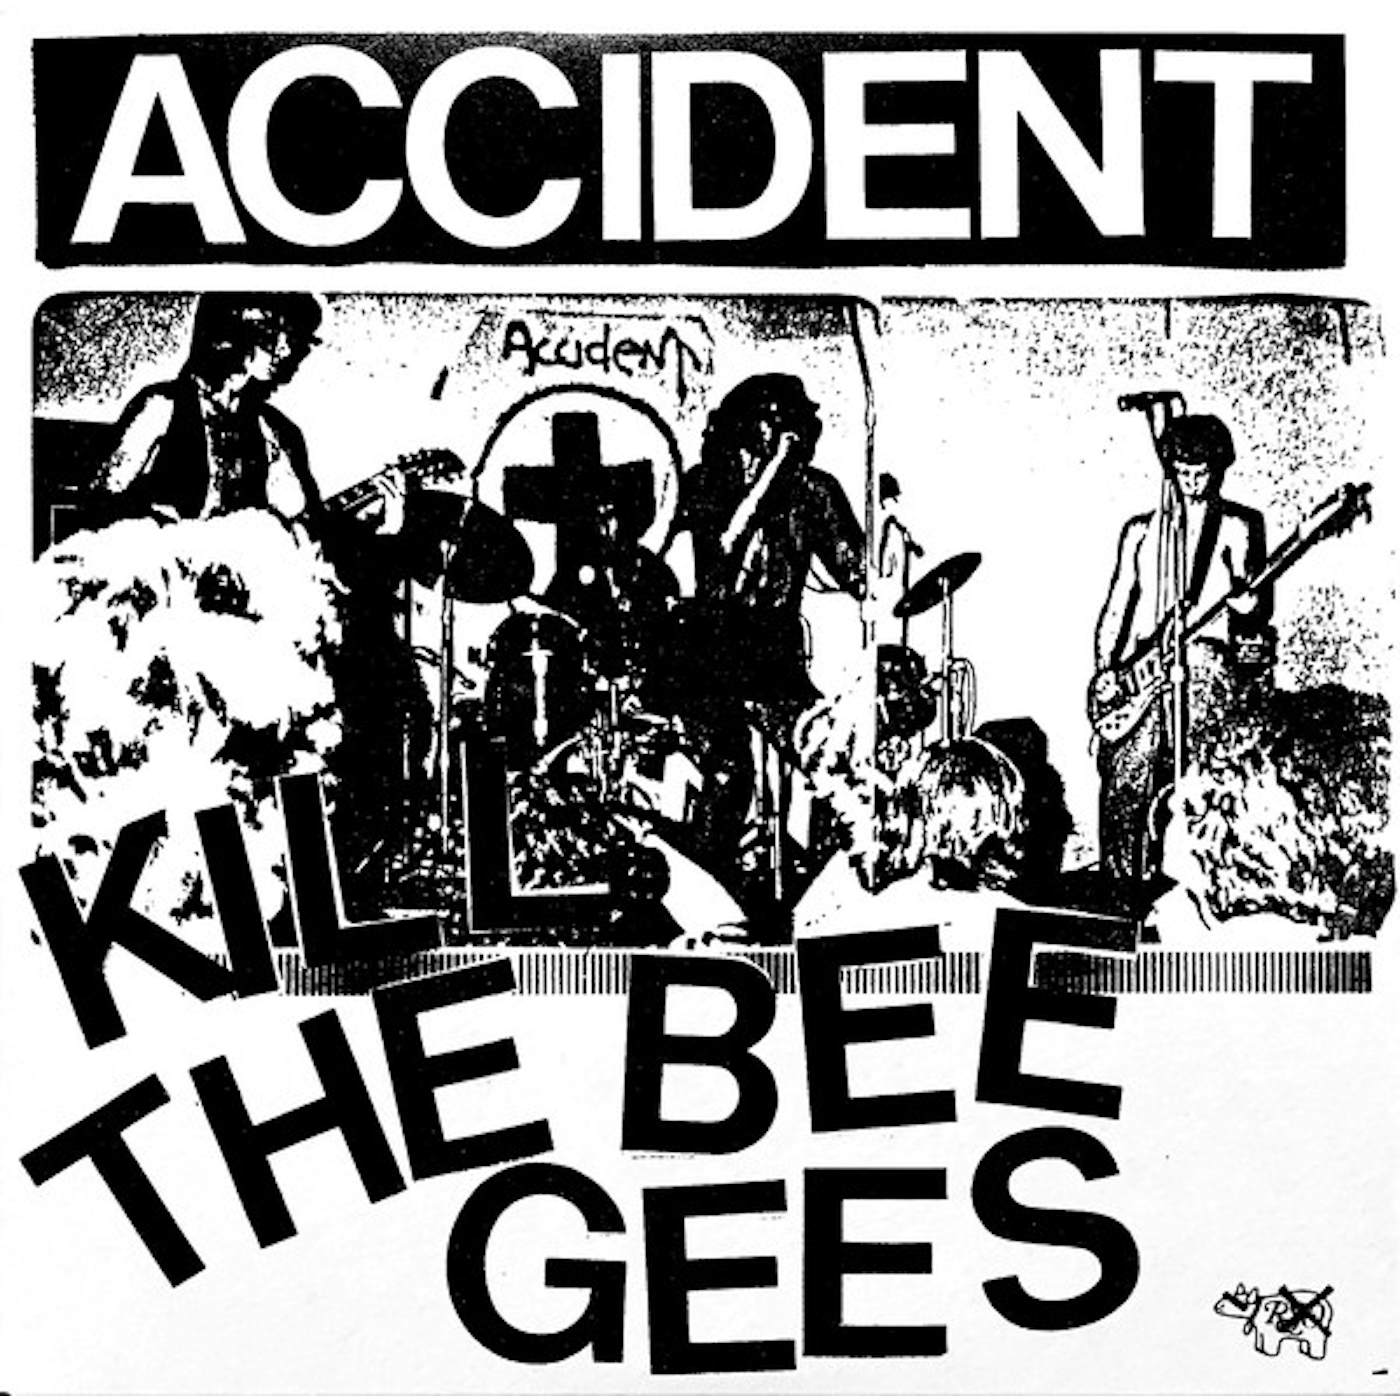 Accident Kill The Bee Gees Vinyl Record